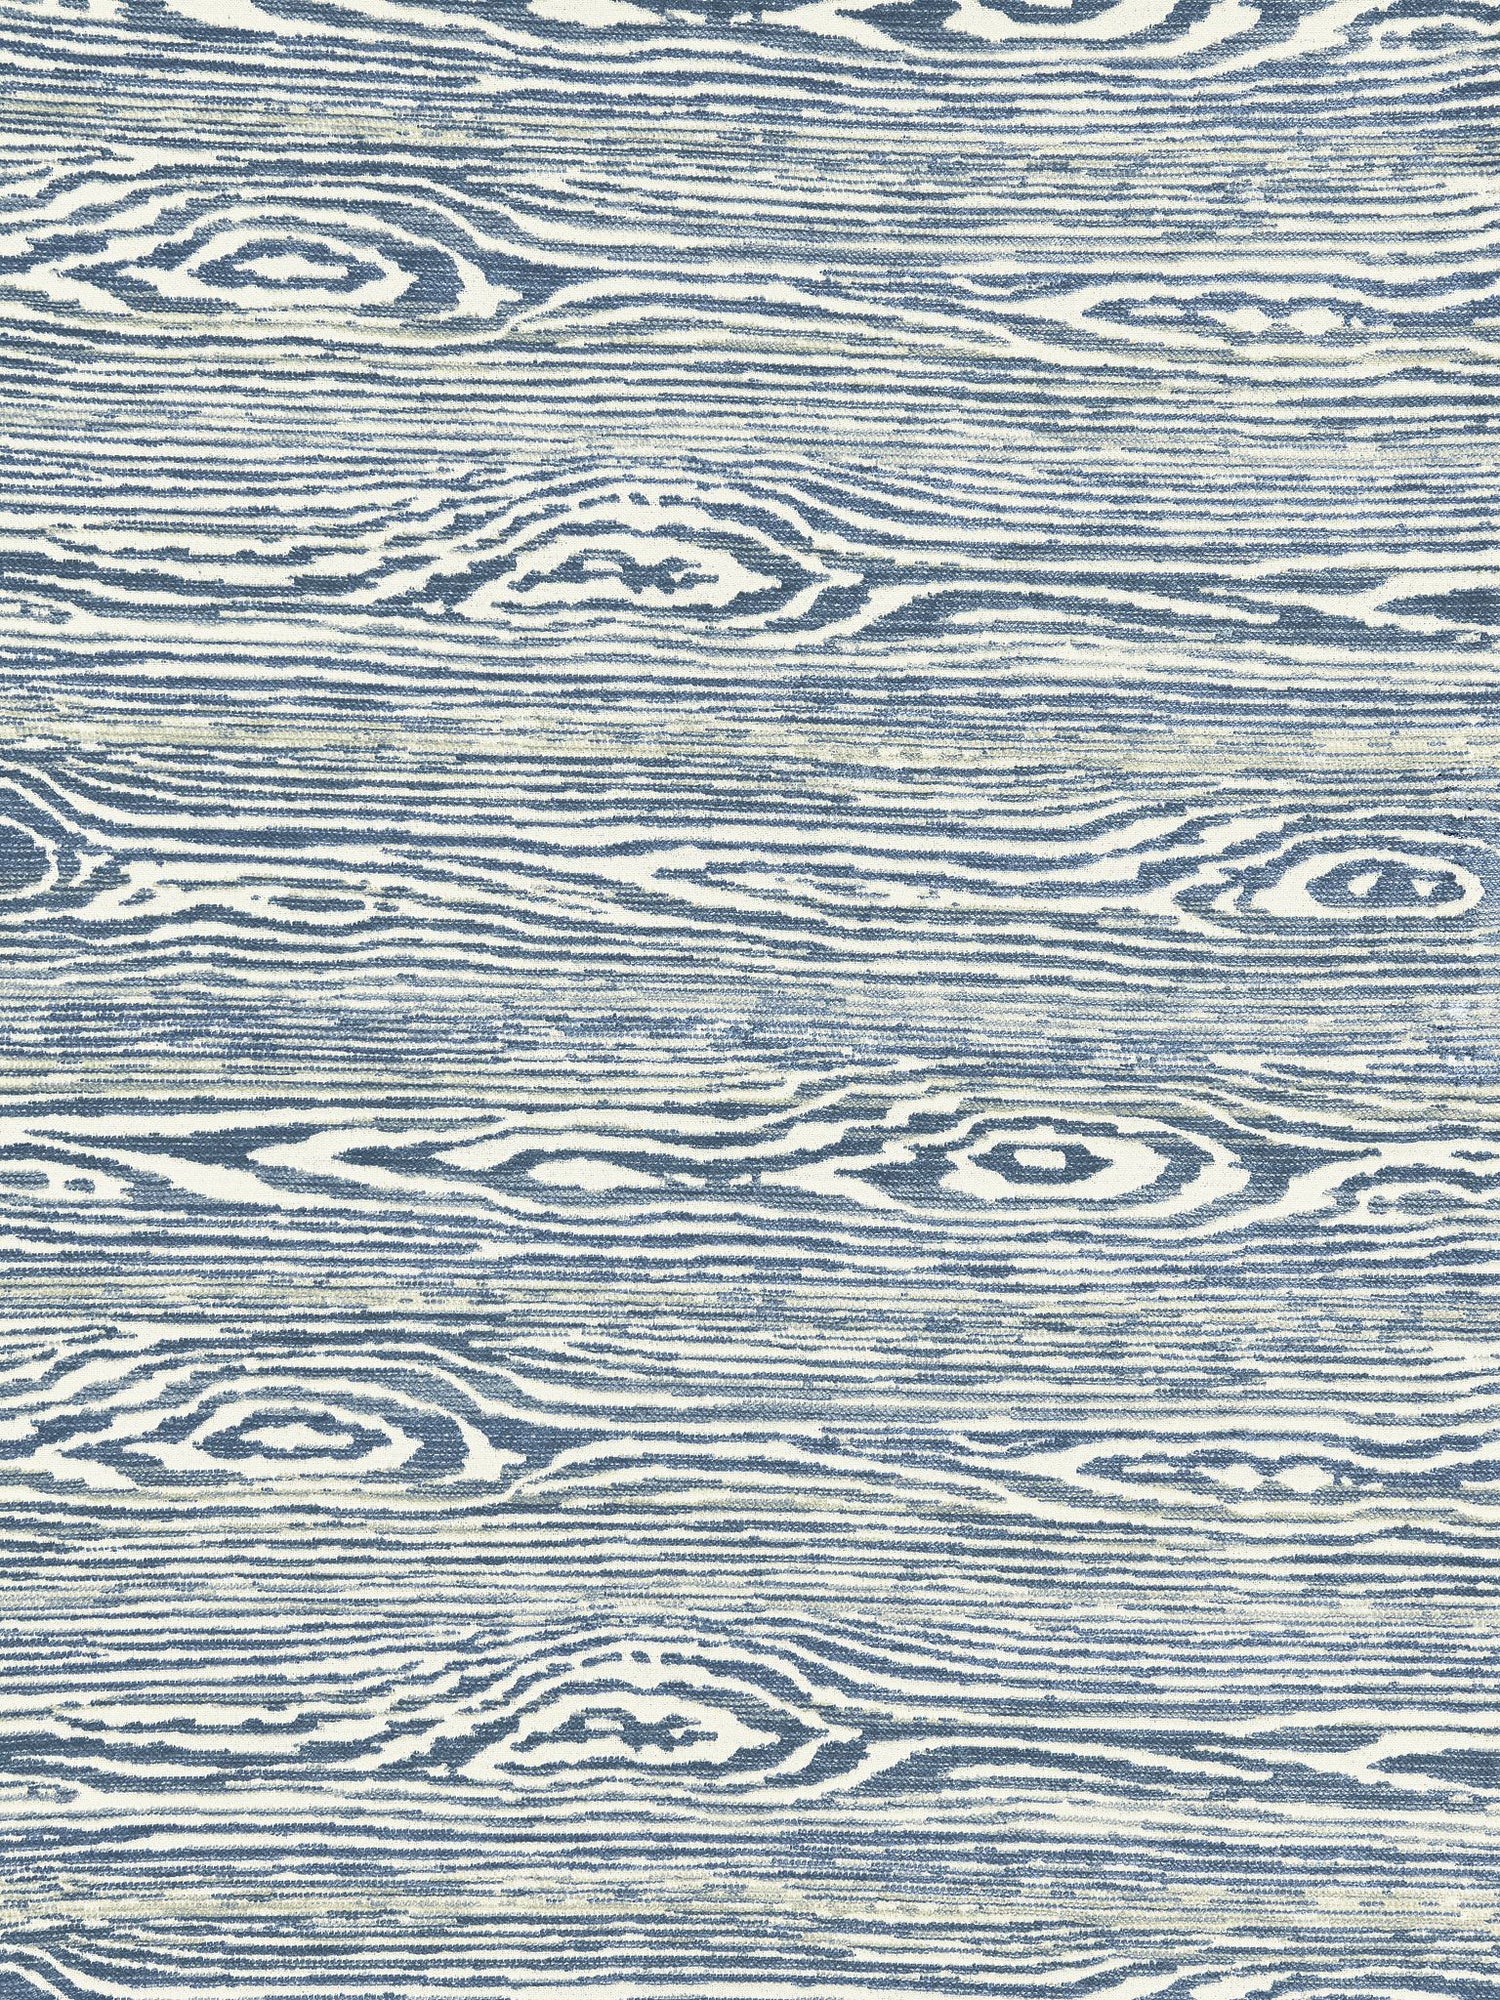 Muir Woods fabric in wedgwood color - pattern number CD 0052OB41 - by Scalamandre in the Old World Weavers collection